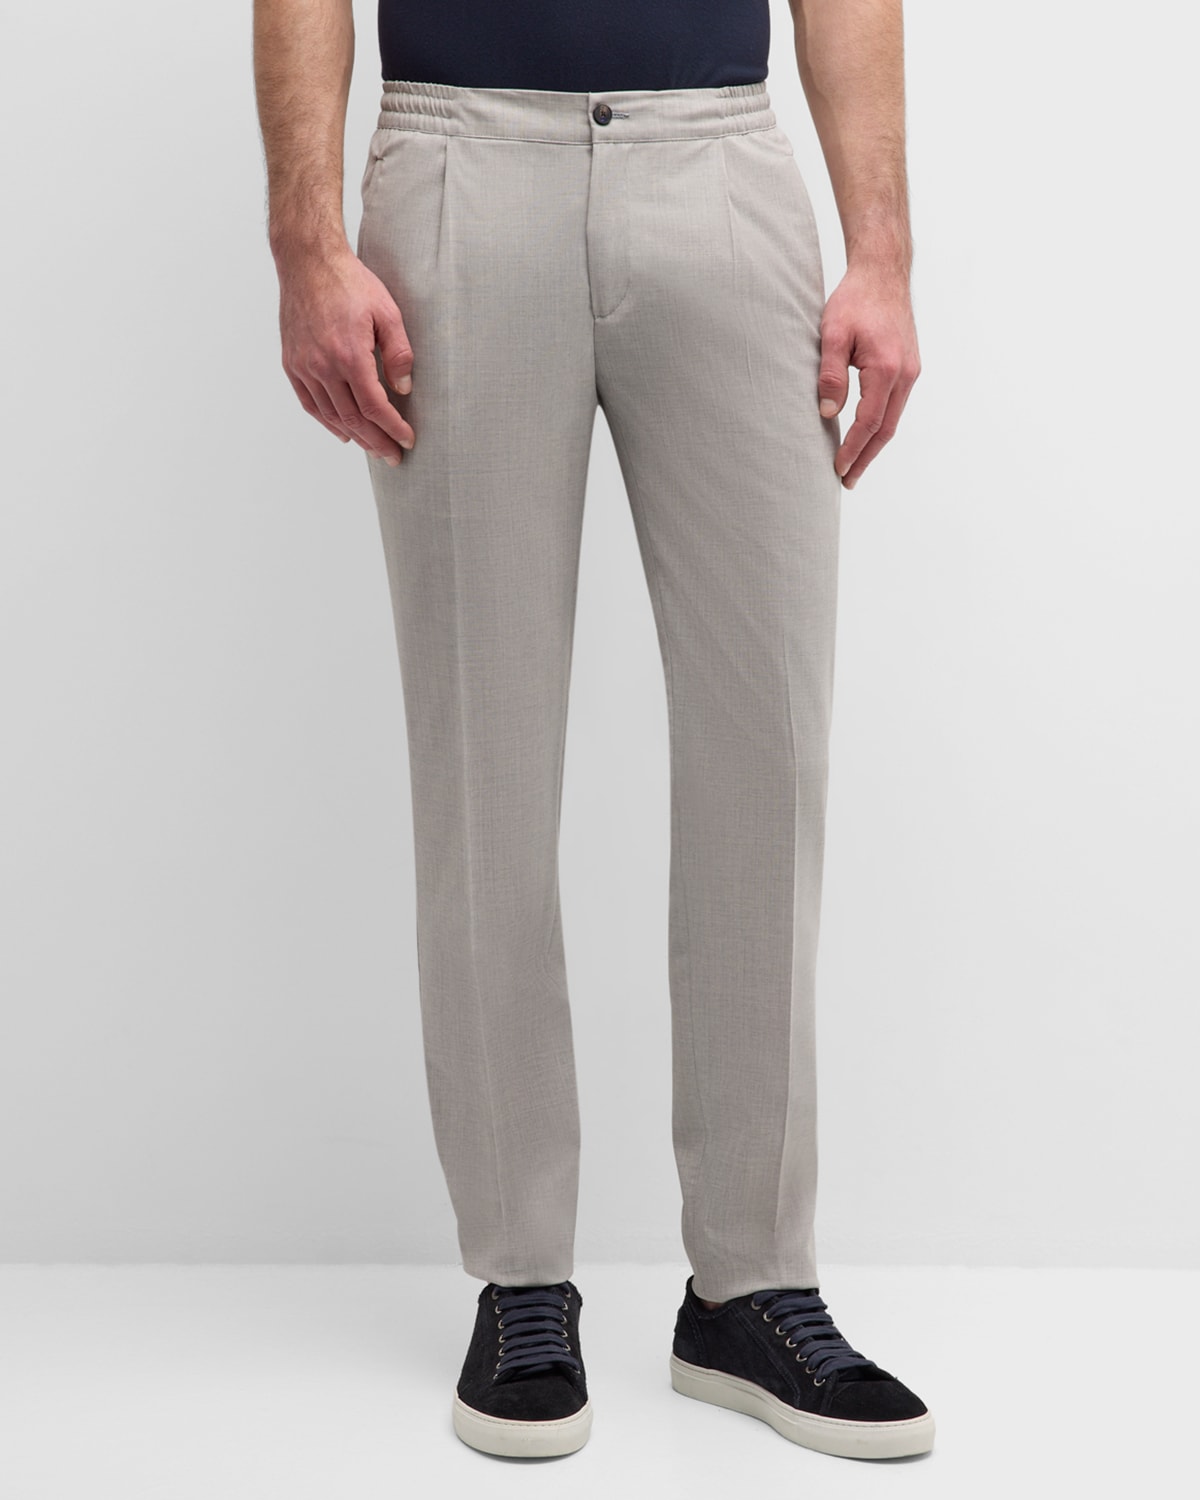 Men's Wool Stretch Pleated Trousers